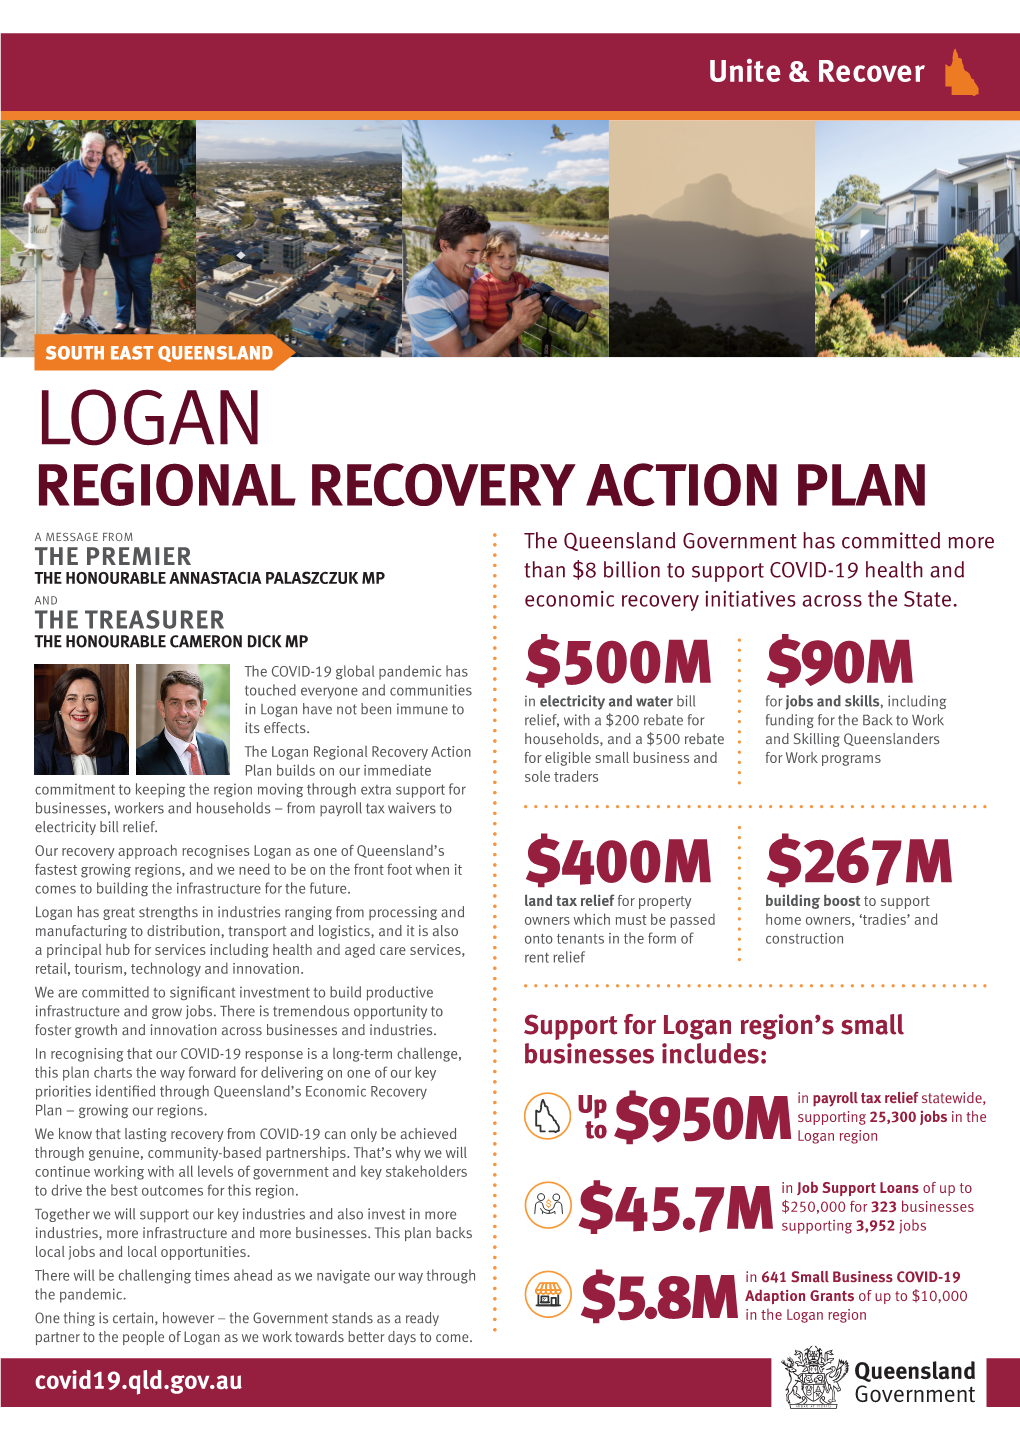 Logan Regional Recovery Action Plan